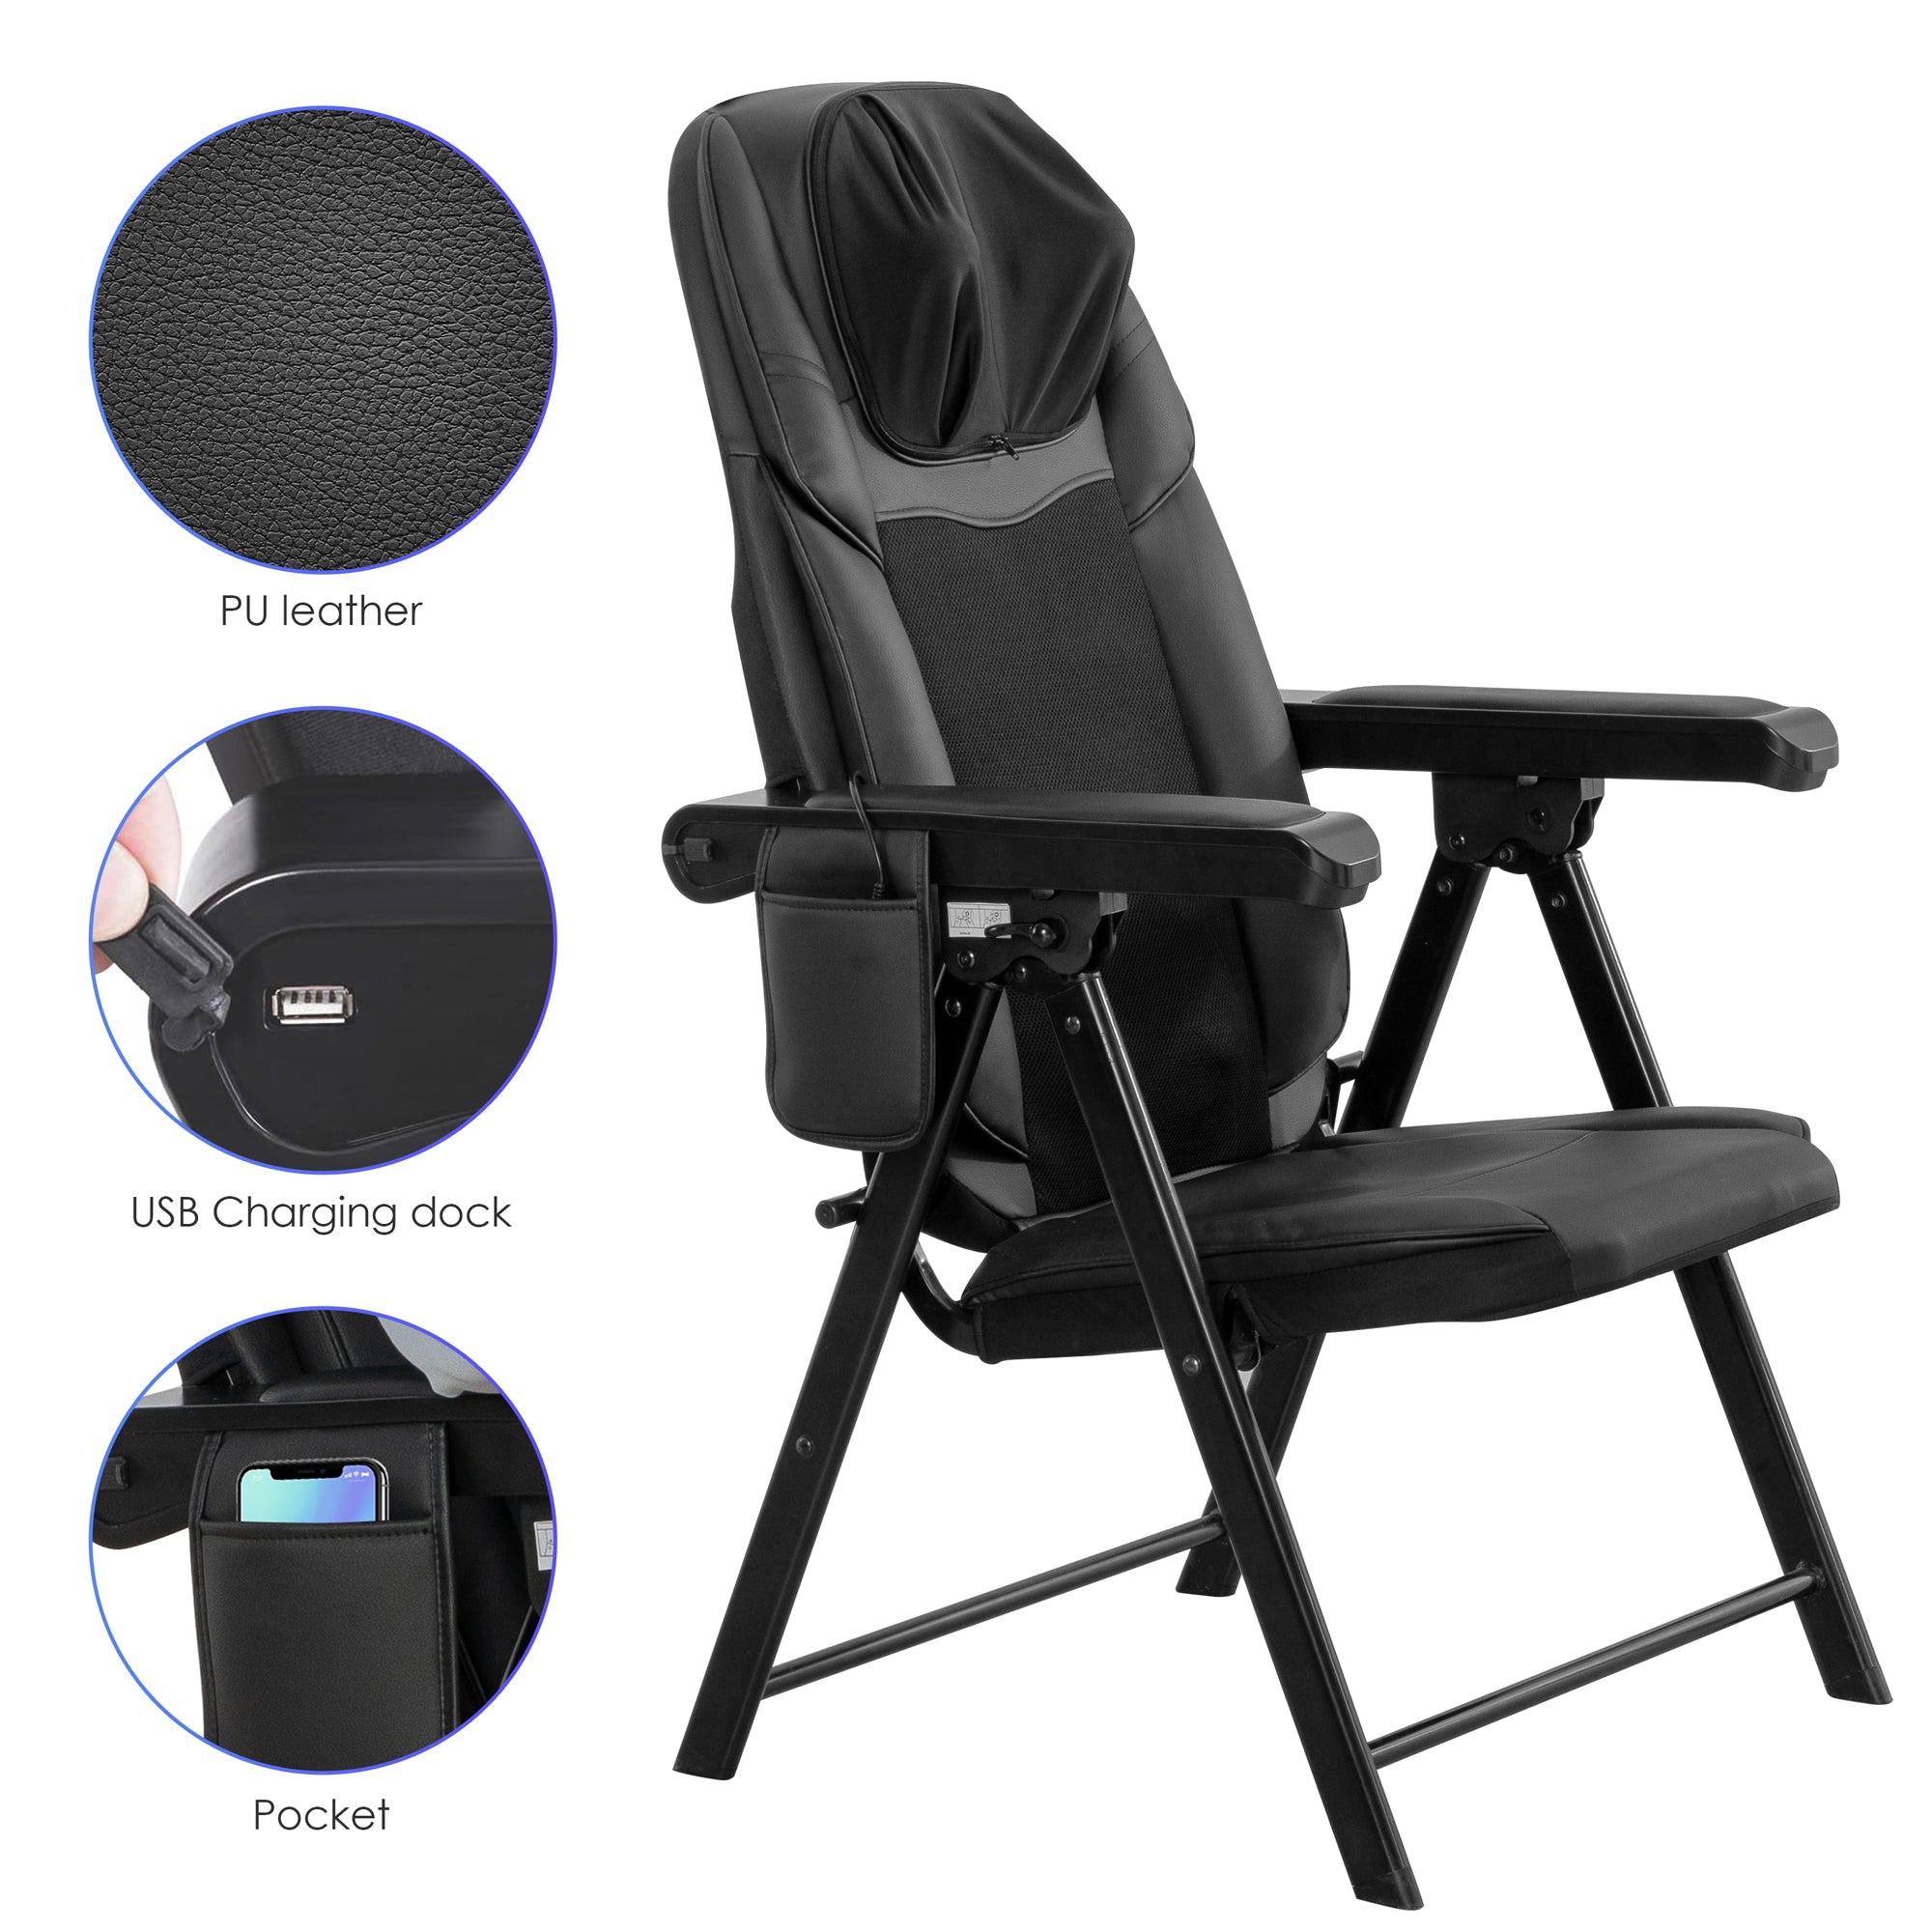 Shiatsu Massage Chair Pad Foldable Calf Massager for Home & Office Use, Size: 15.8 in